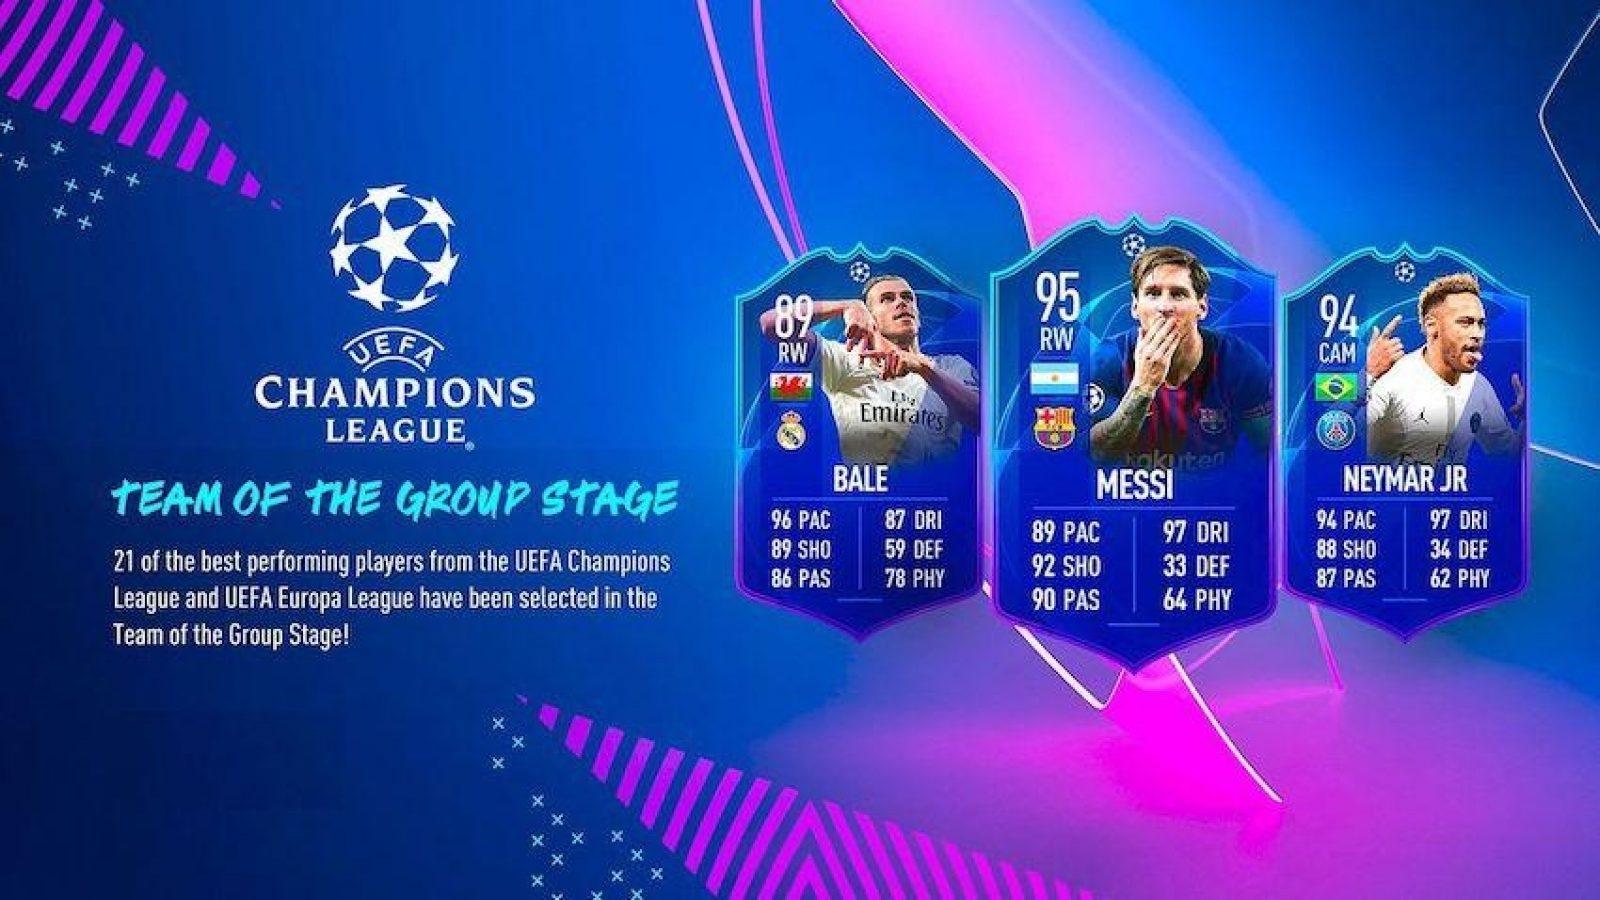 CHAMPIONS LEAGUE IN FIFA 19?